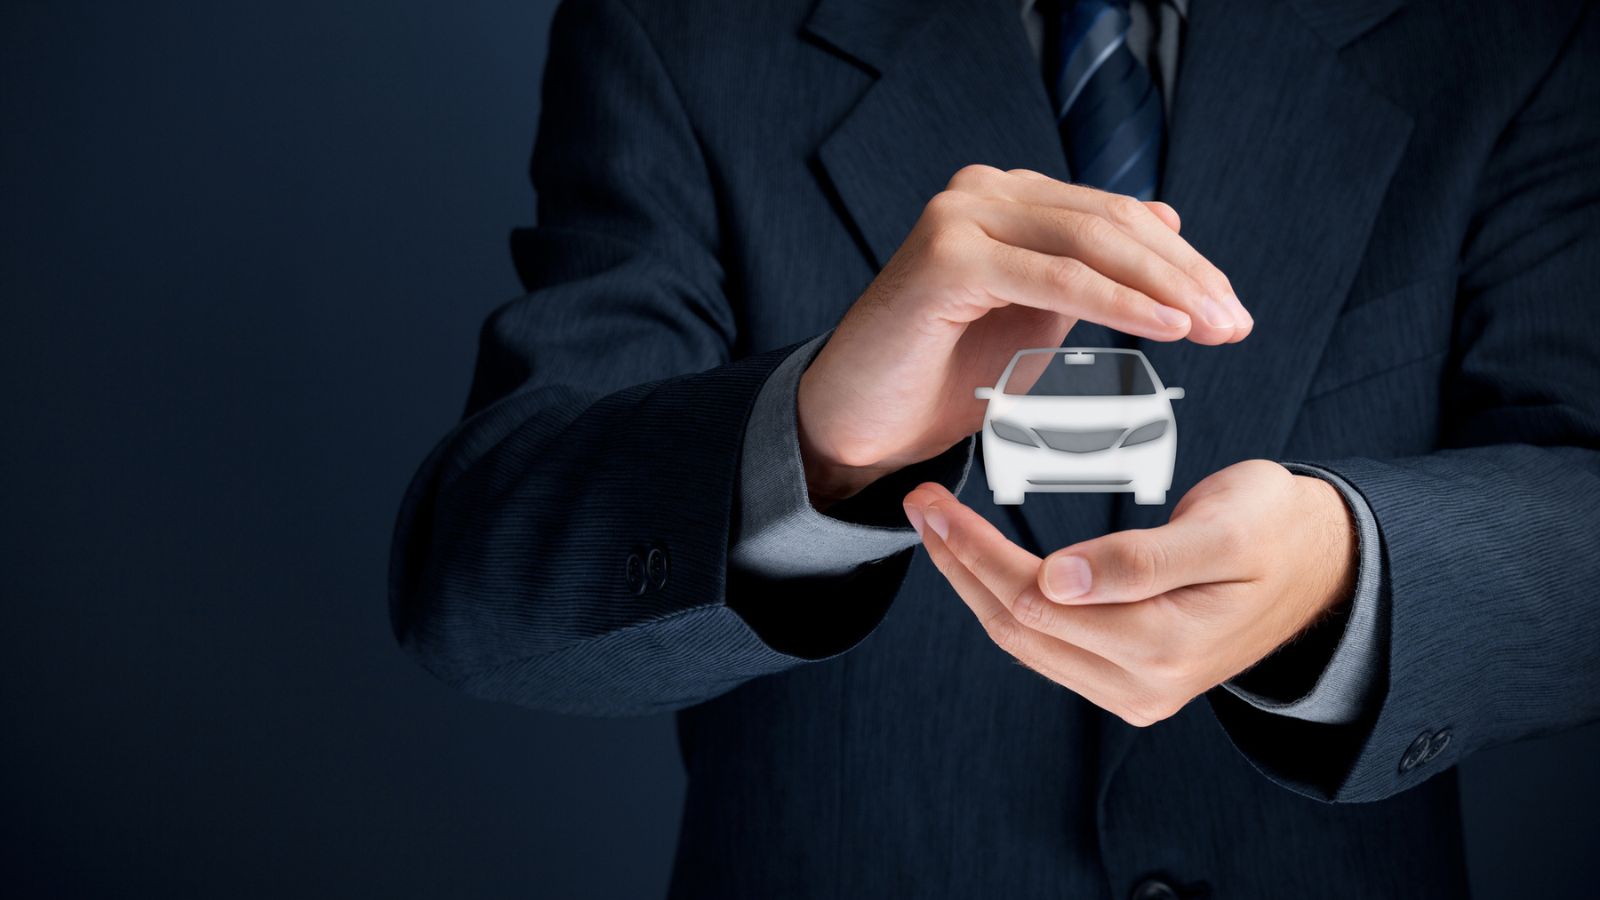 <p>When renting a car, many travelers opt for additional insurance provided by the rental company to ensure peace of mind. However, this insurance can substantially increase the total cost of your rental, which may later regret. Before purchasing this add-on insurance, it's advisable to check if your existing car insurance policy covers rental cars.</p>